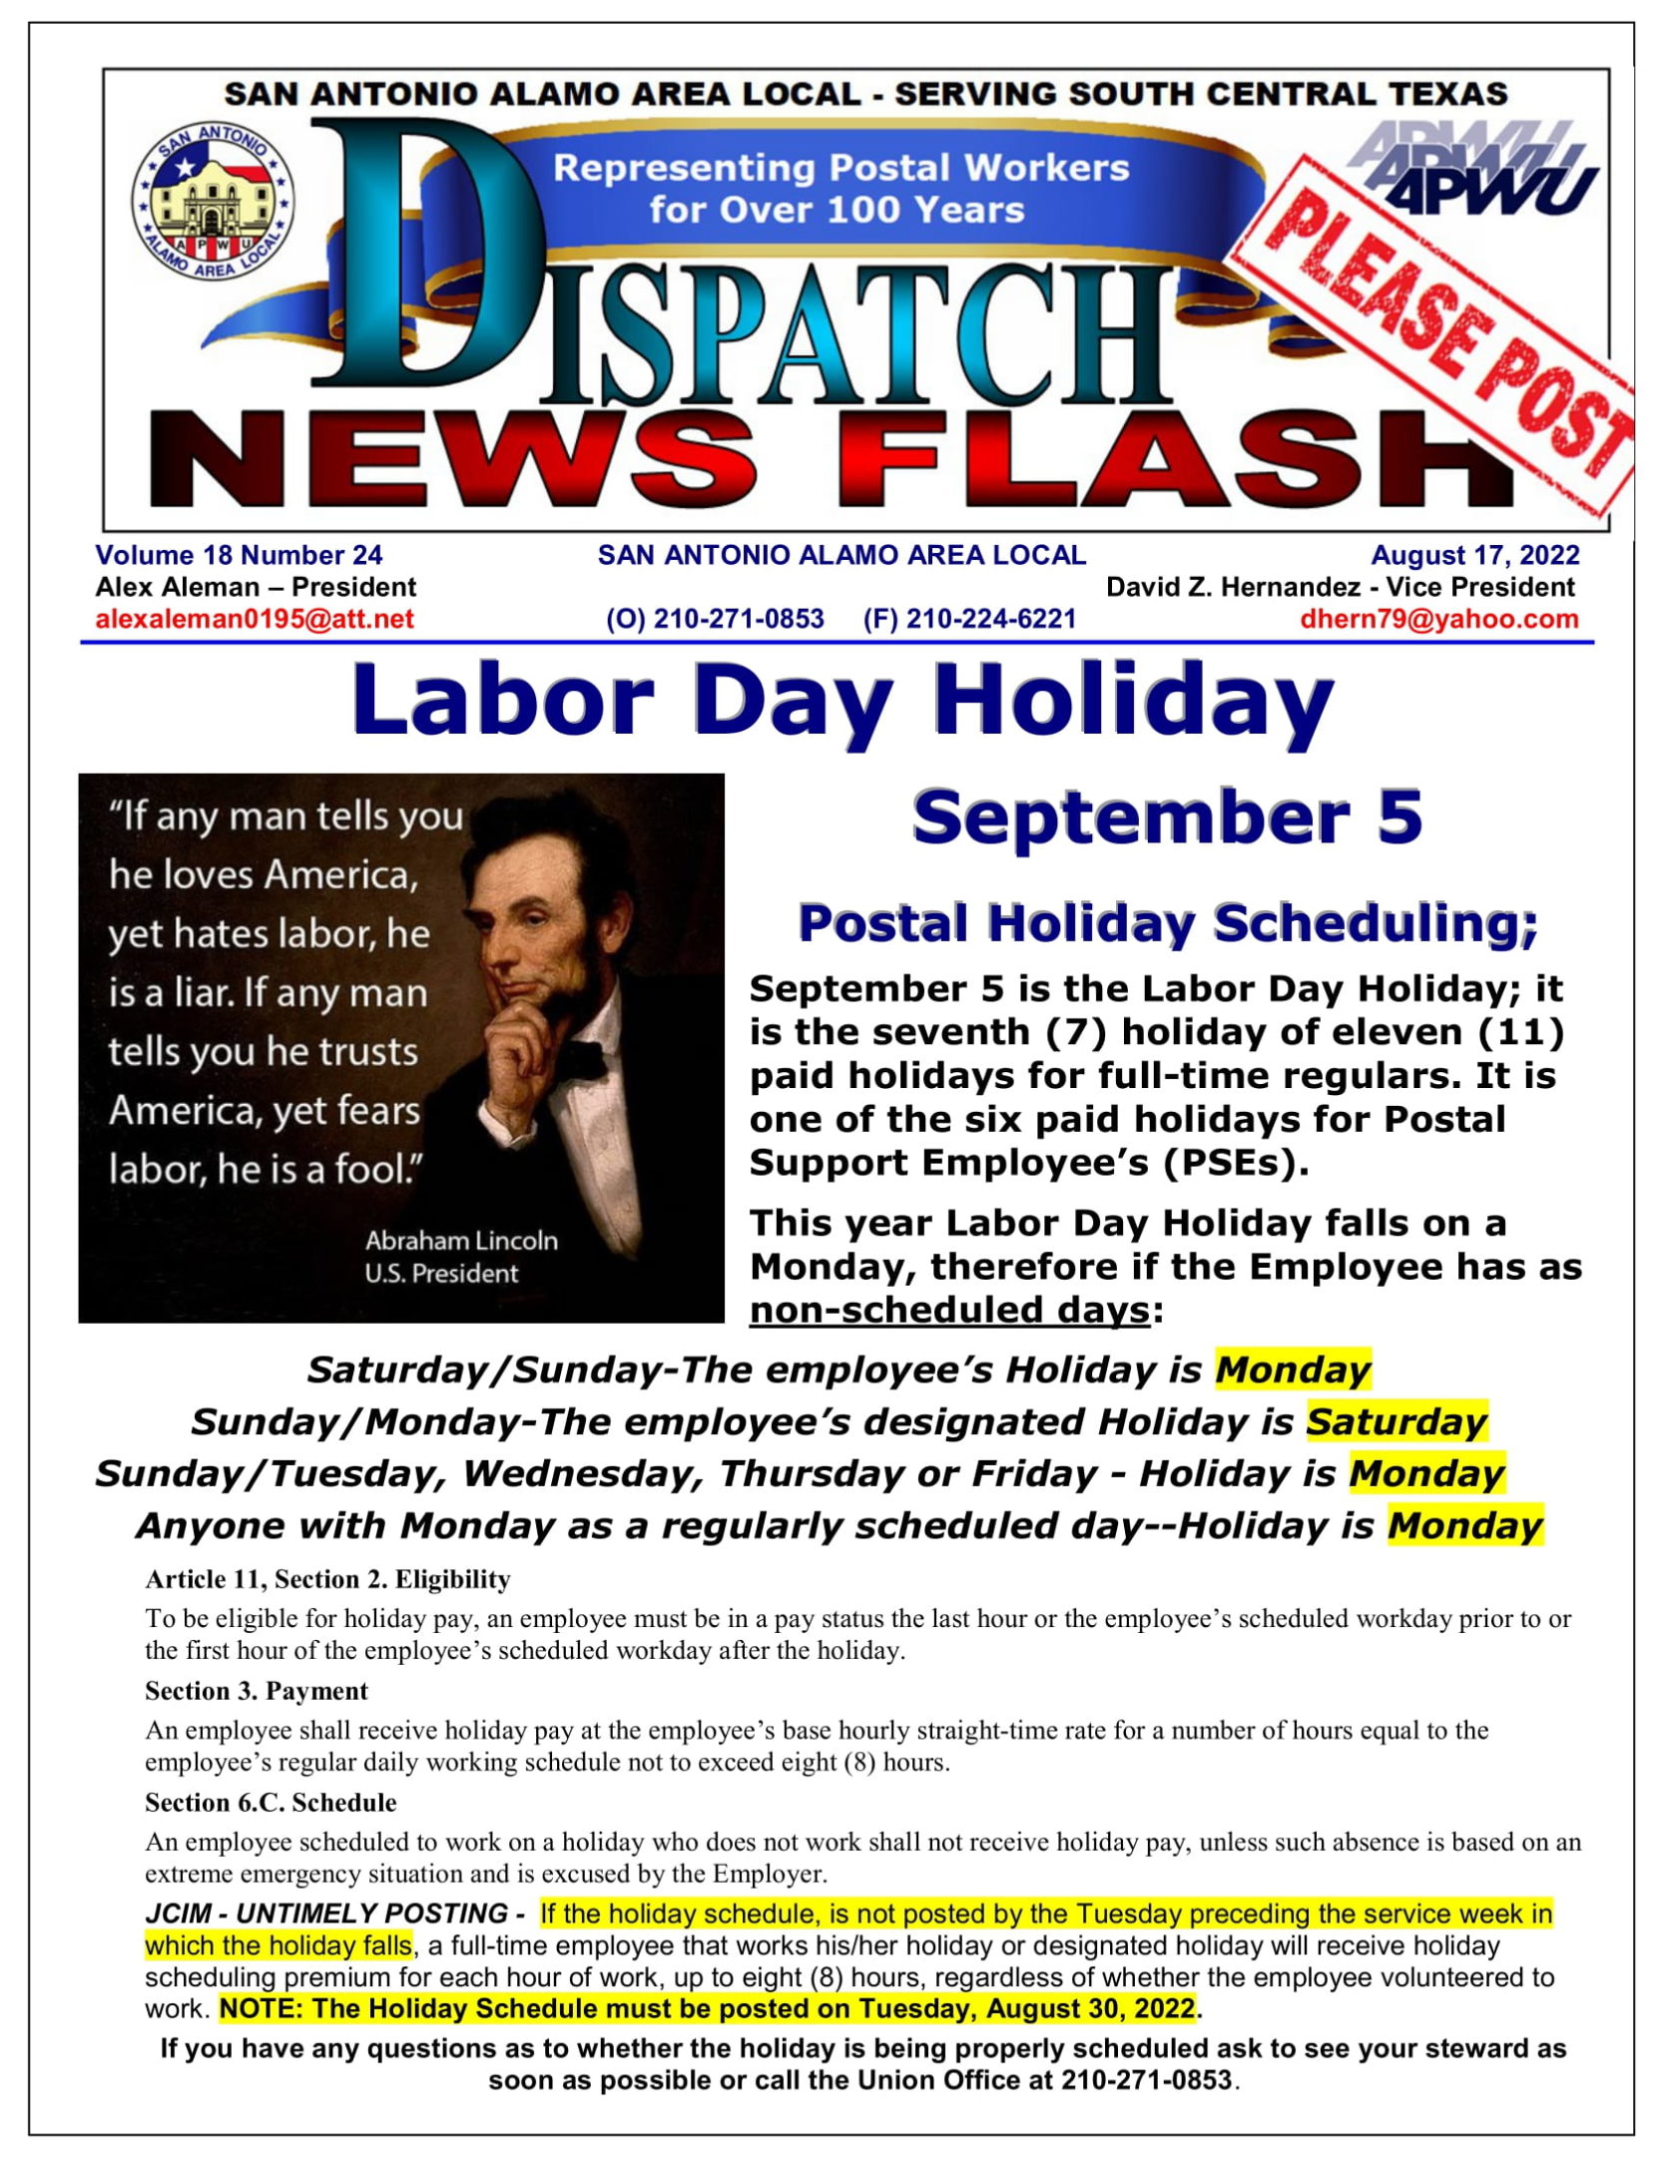 Labor Day Holiday - 